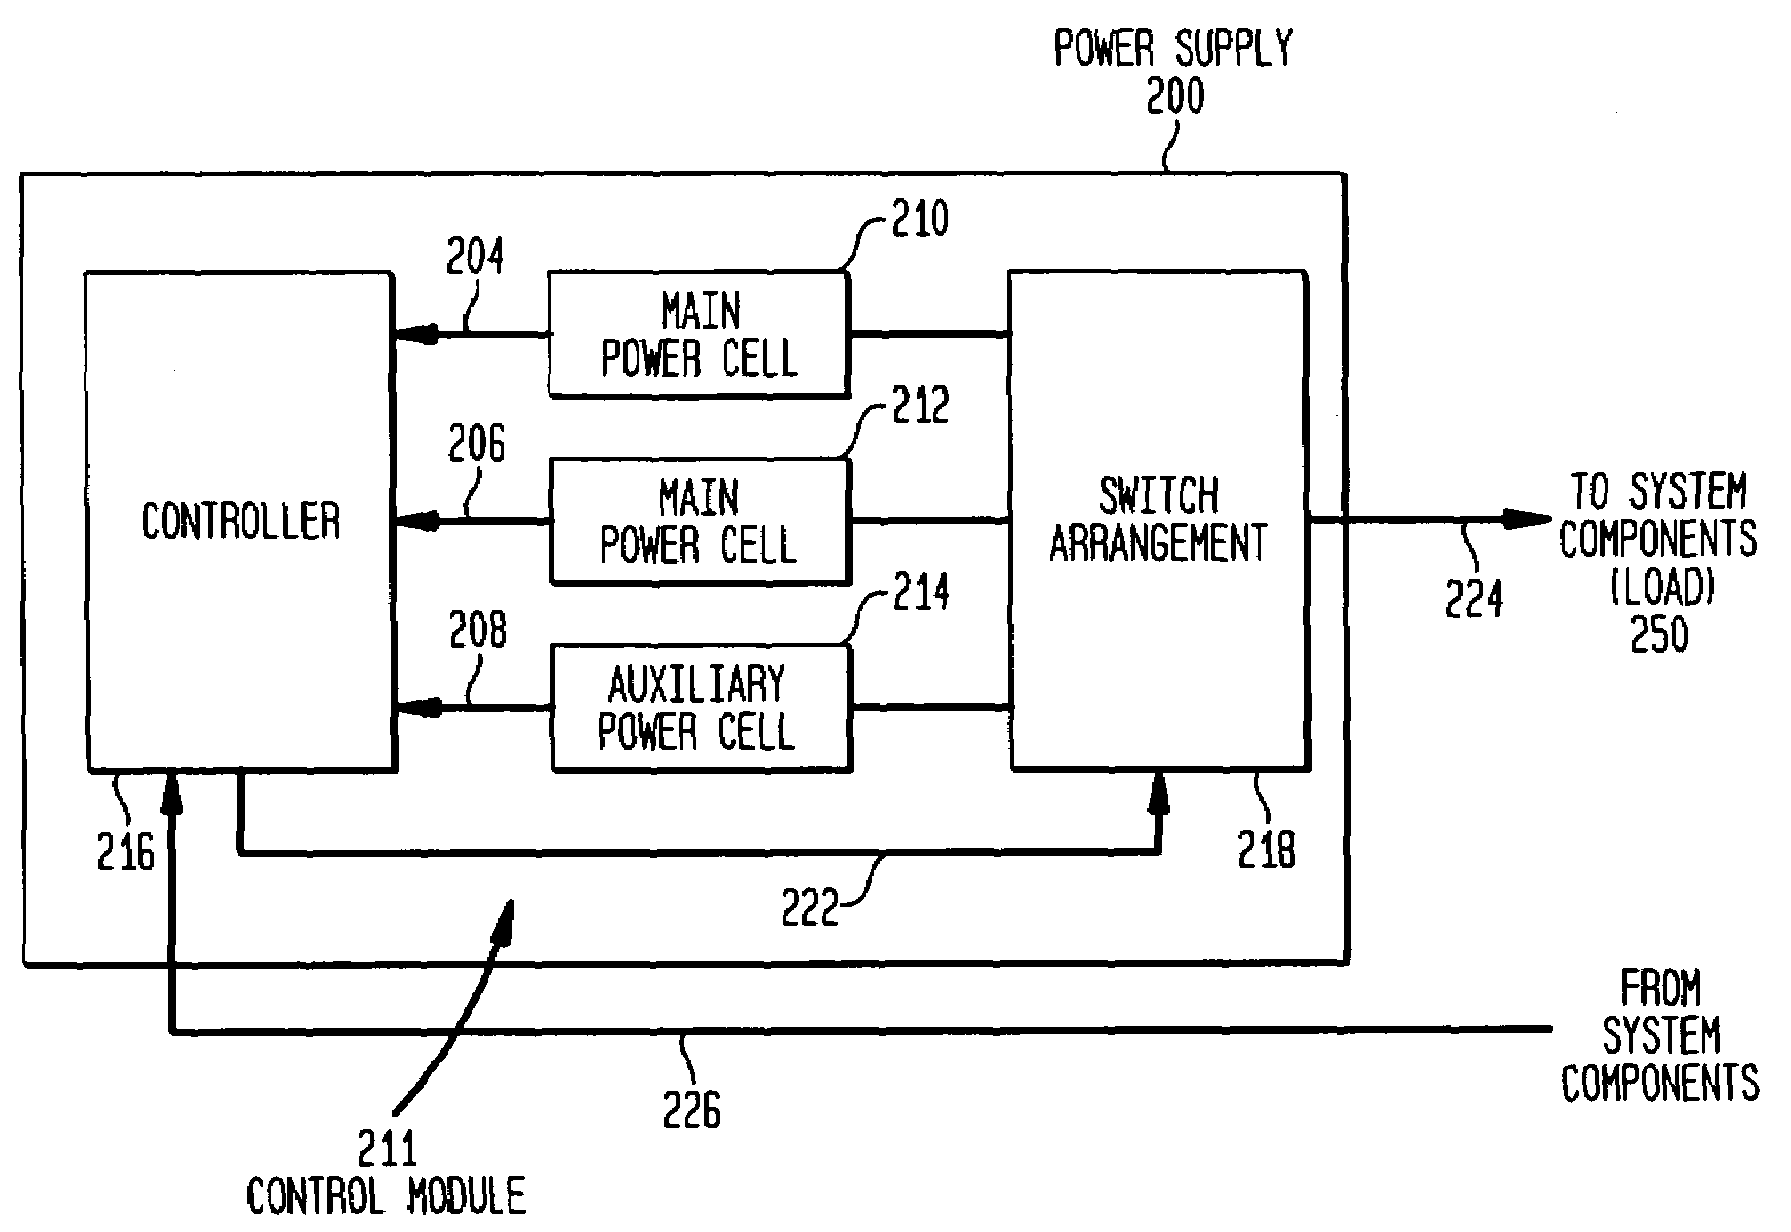 Power supply having an auxiliary power cell